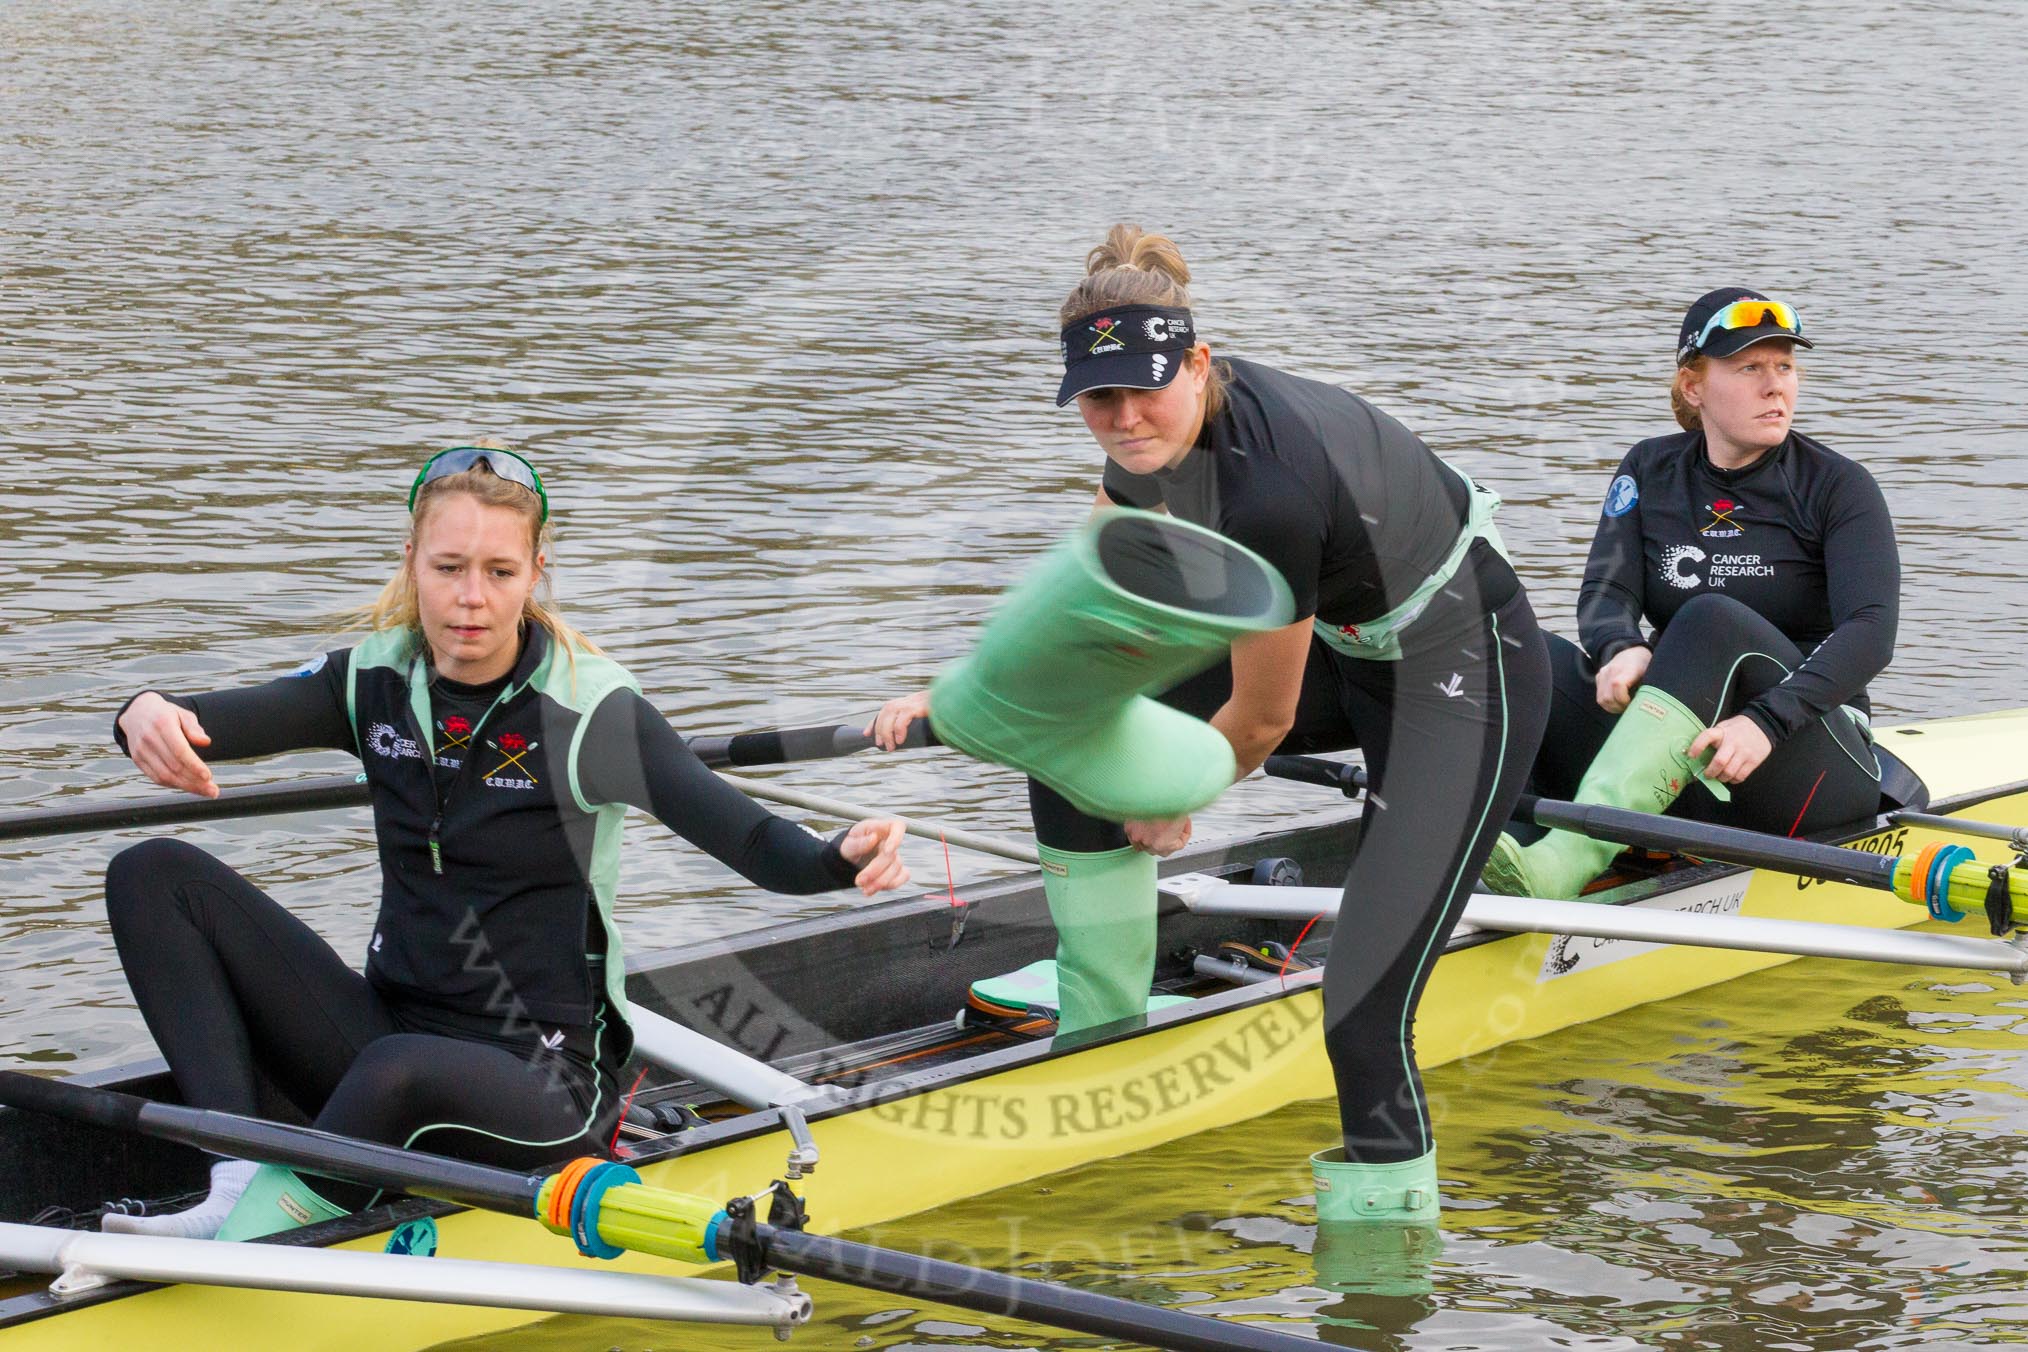 The Boat Race season 2017 - Women's Boat Race Fixture CUWBC vs Univerity of London: CUWBC's 3, Ashton Brown, 2 Kirsten van Fosen, and bow Claire Lamb getting rid of their Wellies.
River Thames between Putney Bridge and Mortlake,
London SW15,

United Kingdom,
on 19 February 2017 at 15:16, image #10